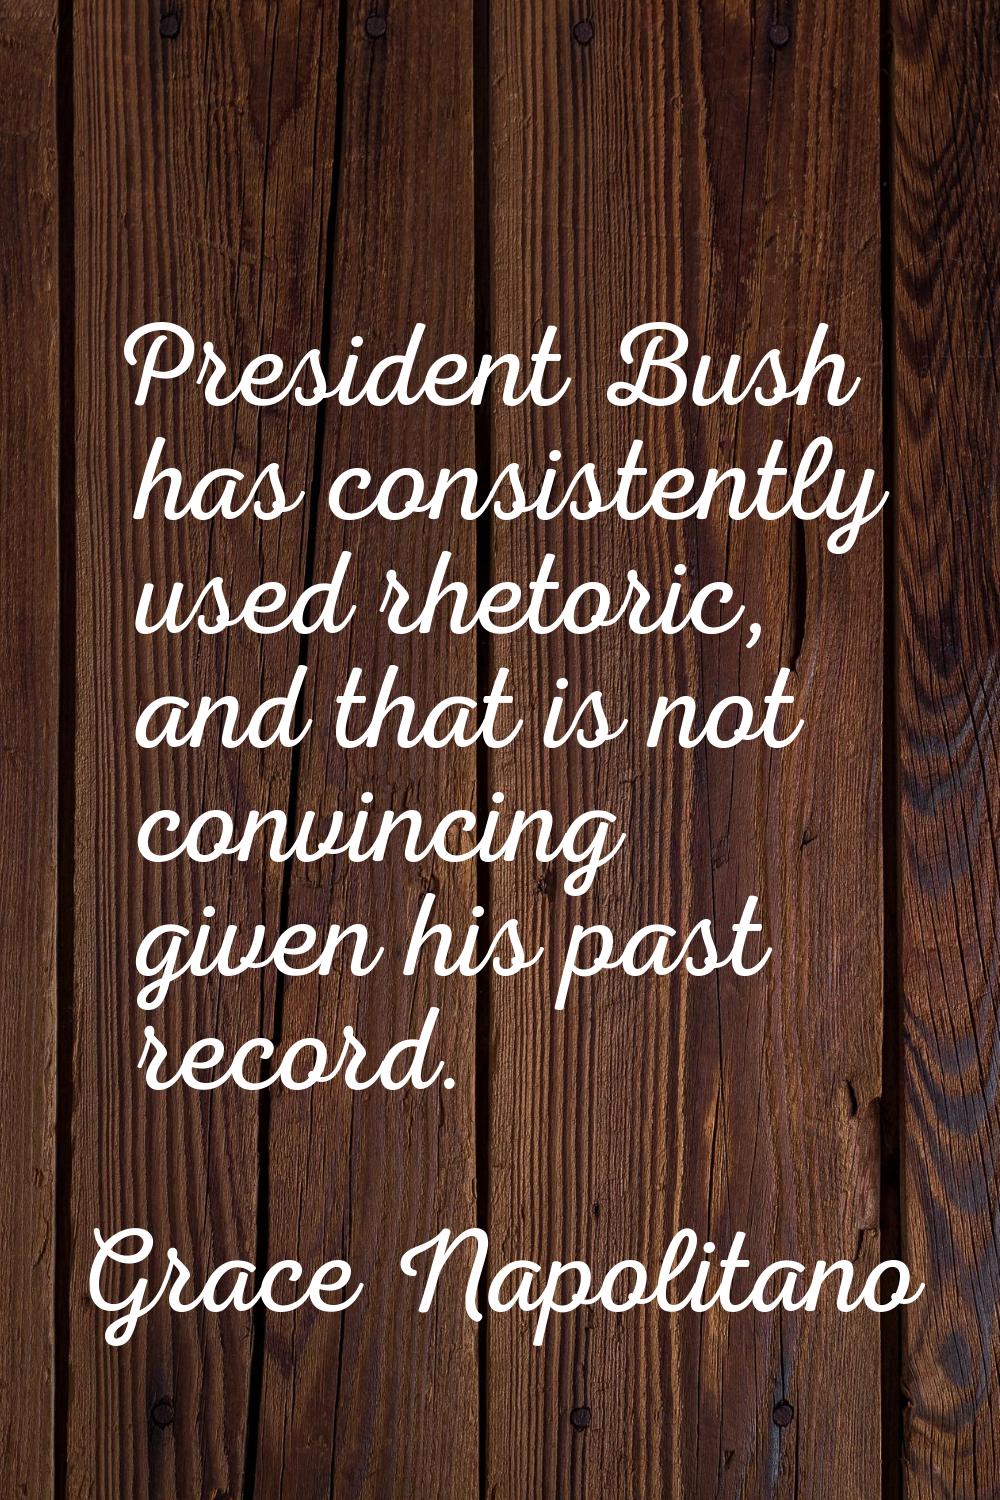 President Bush has consistently used rhetoric, and that is not convincing given his past record.